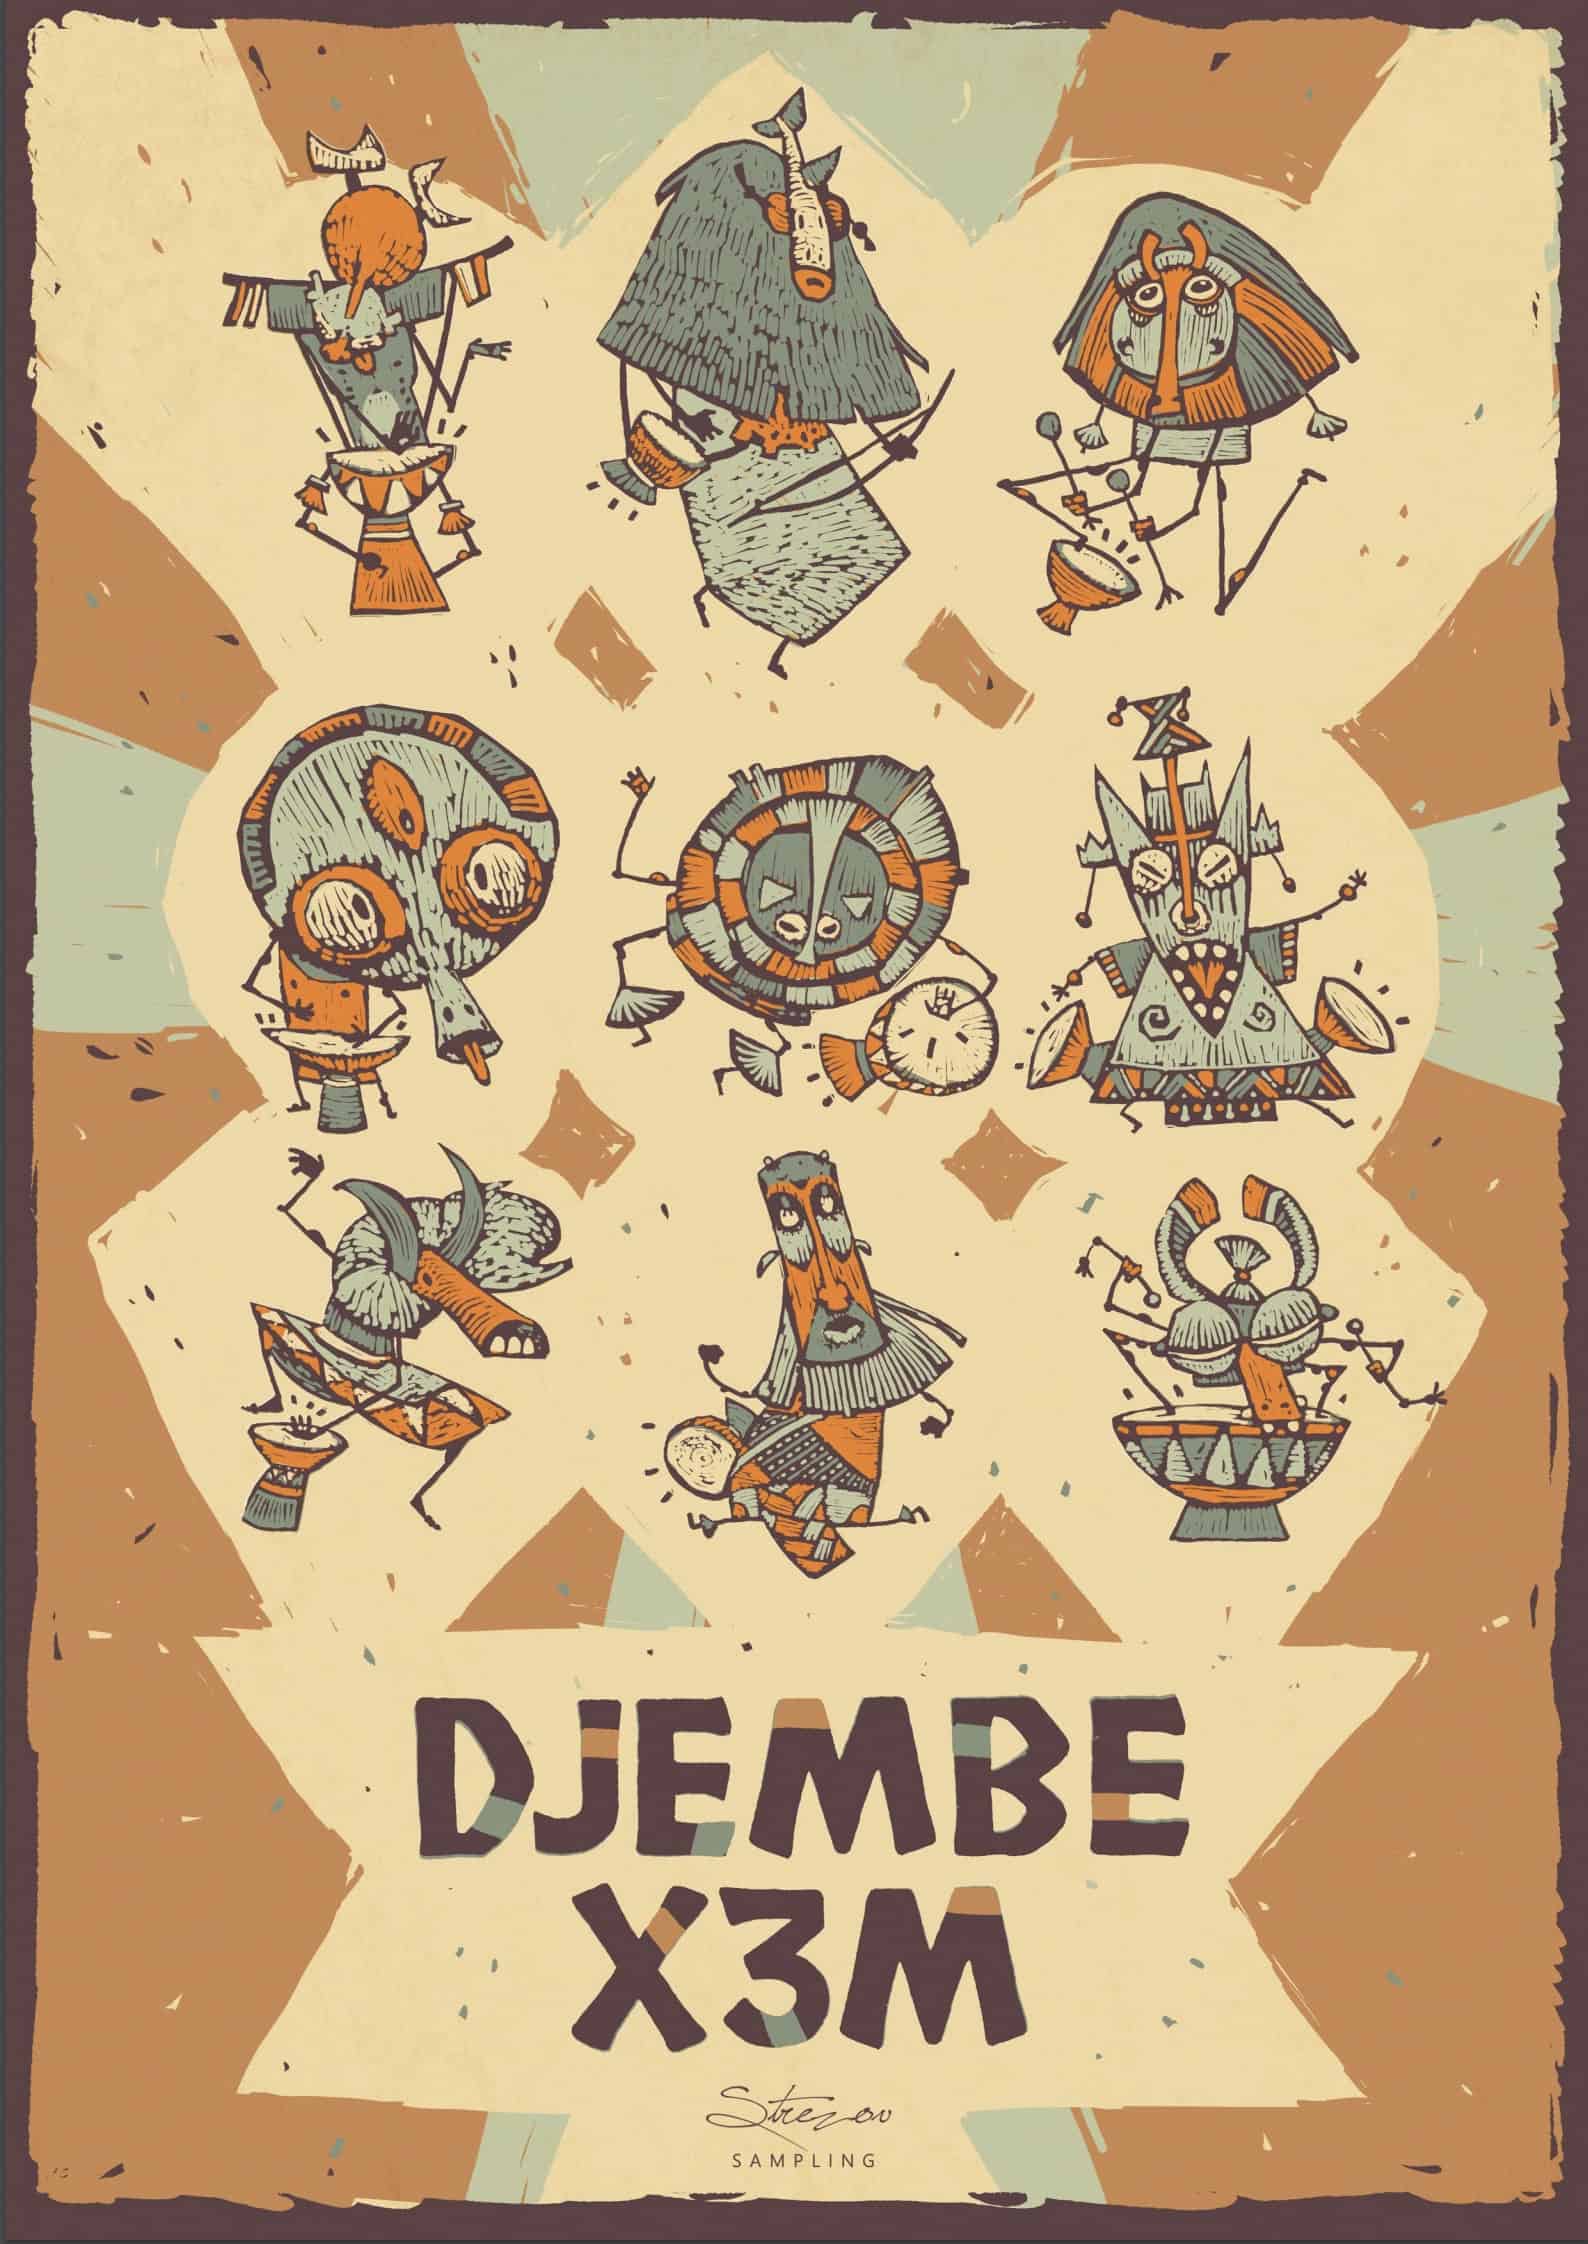 Strezov Sampling’s DJEMBE X3M A Brand-new, Percussive Wave, Direct from Africa